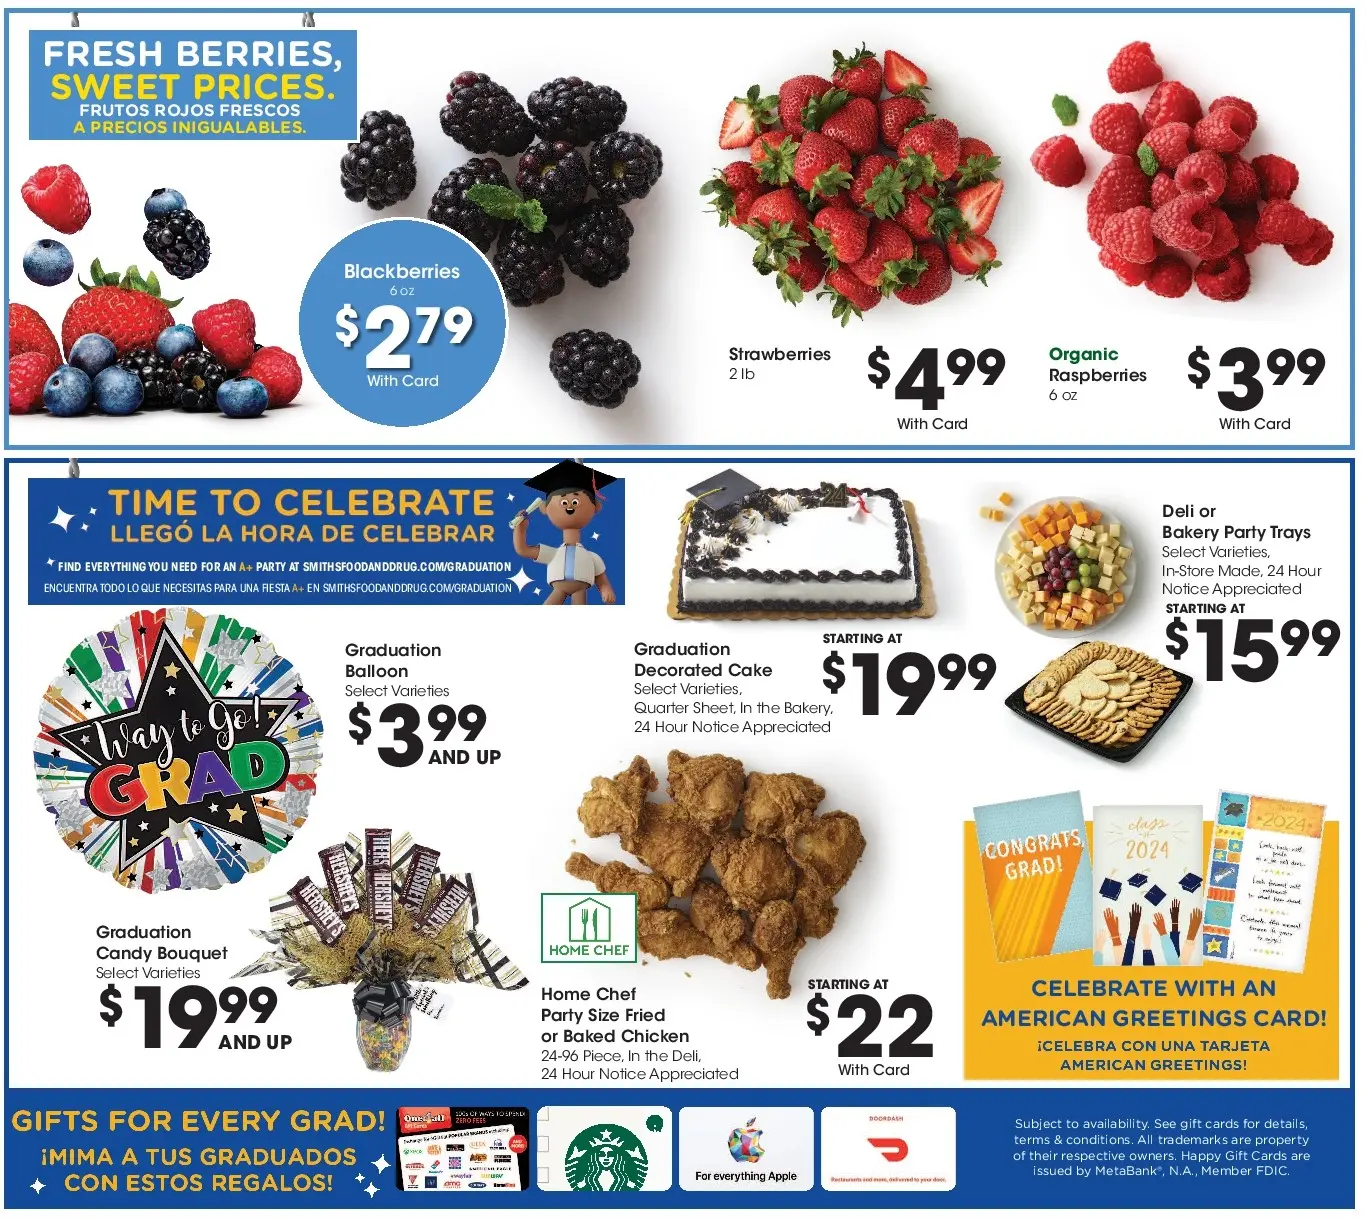 Smith's July 2024 Weekly Sales, Deals, Discounts and Digital Coupons.